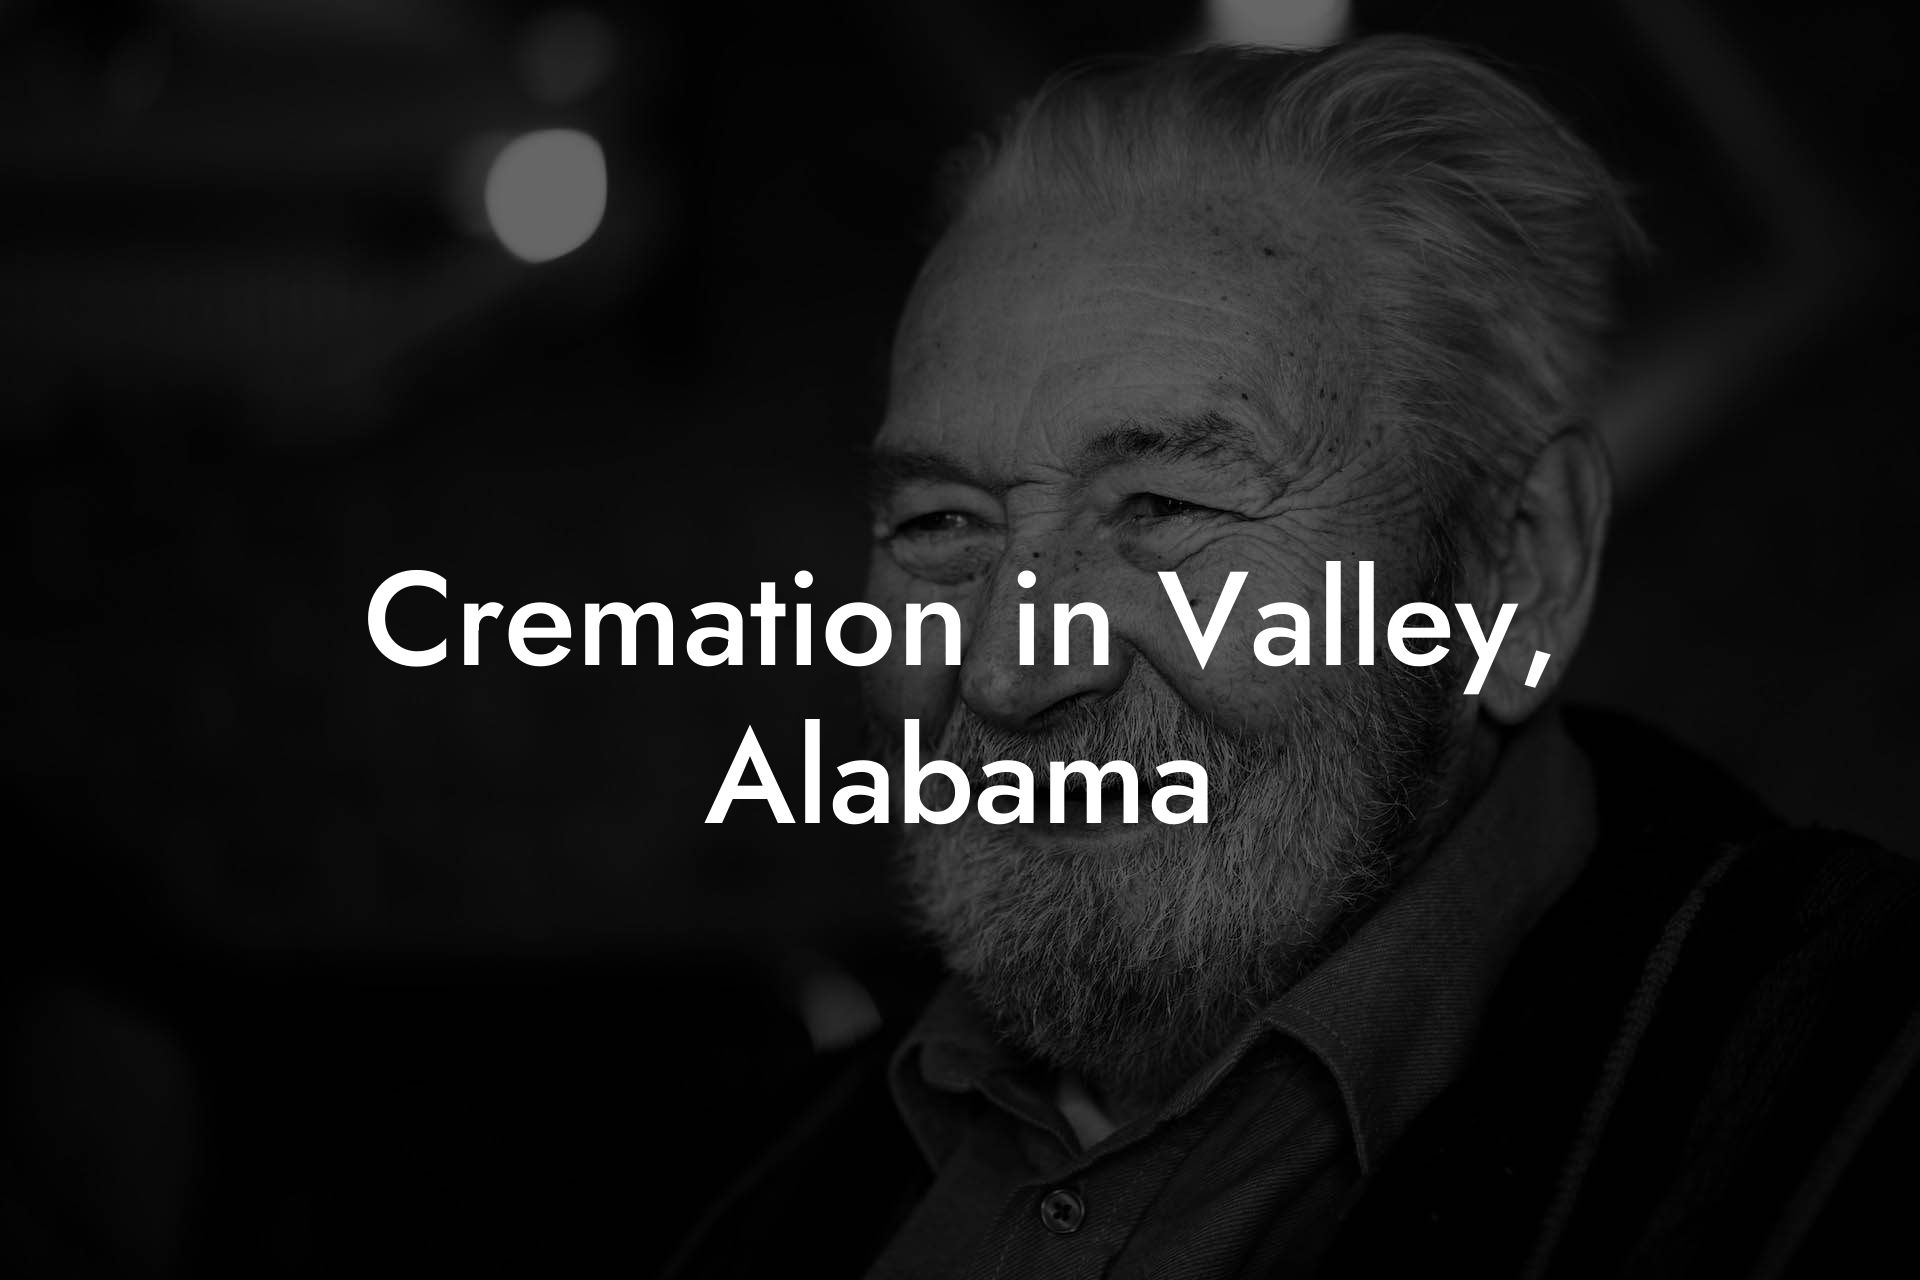 Cremation in Valley, Alabama